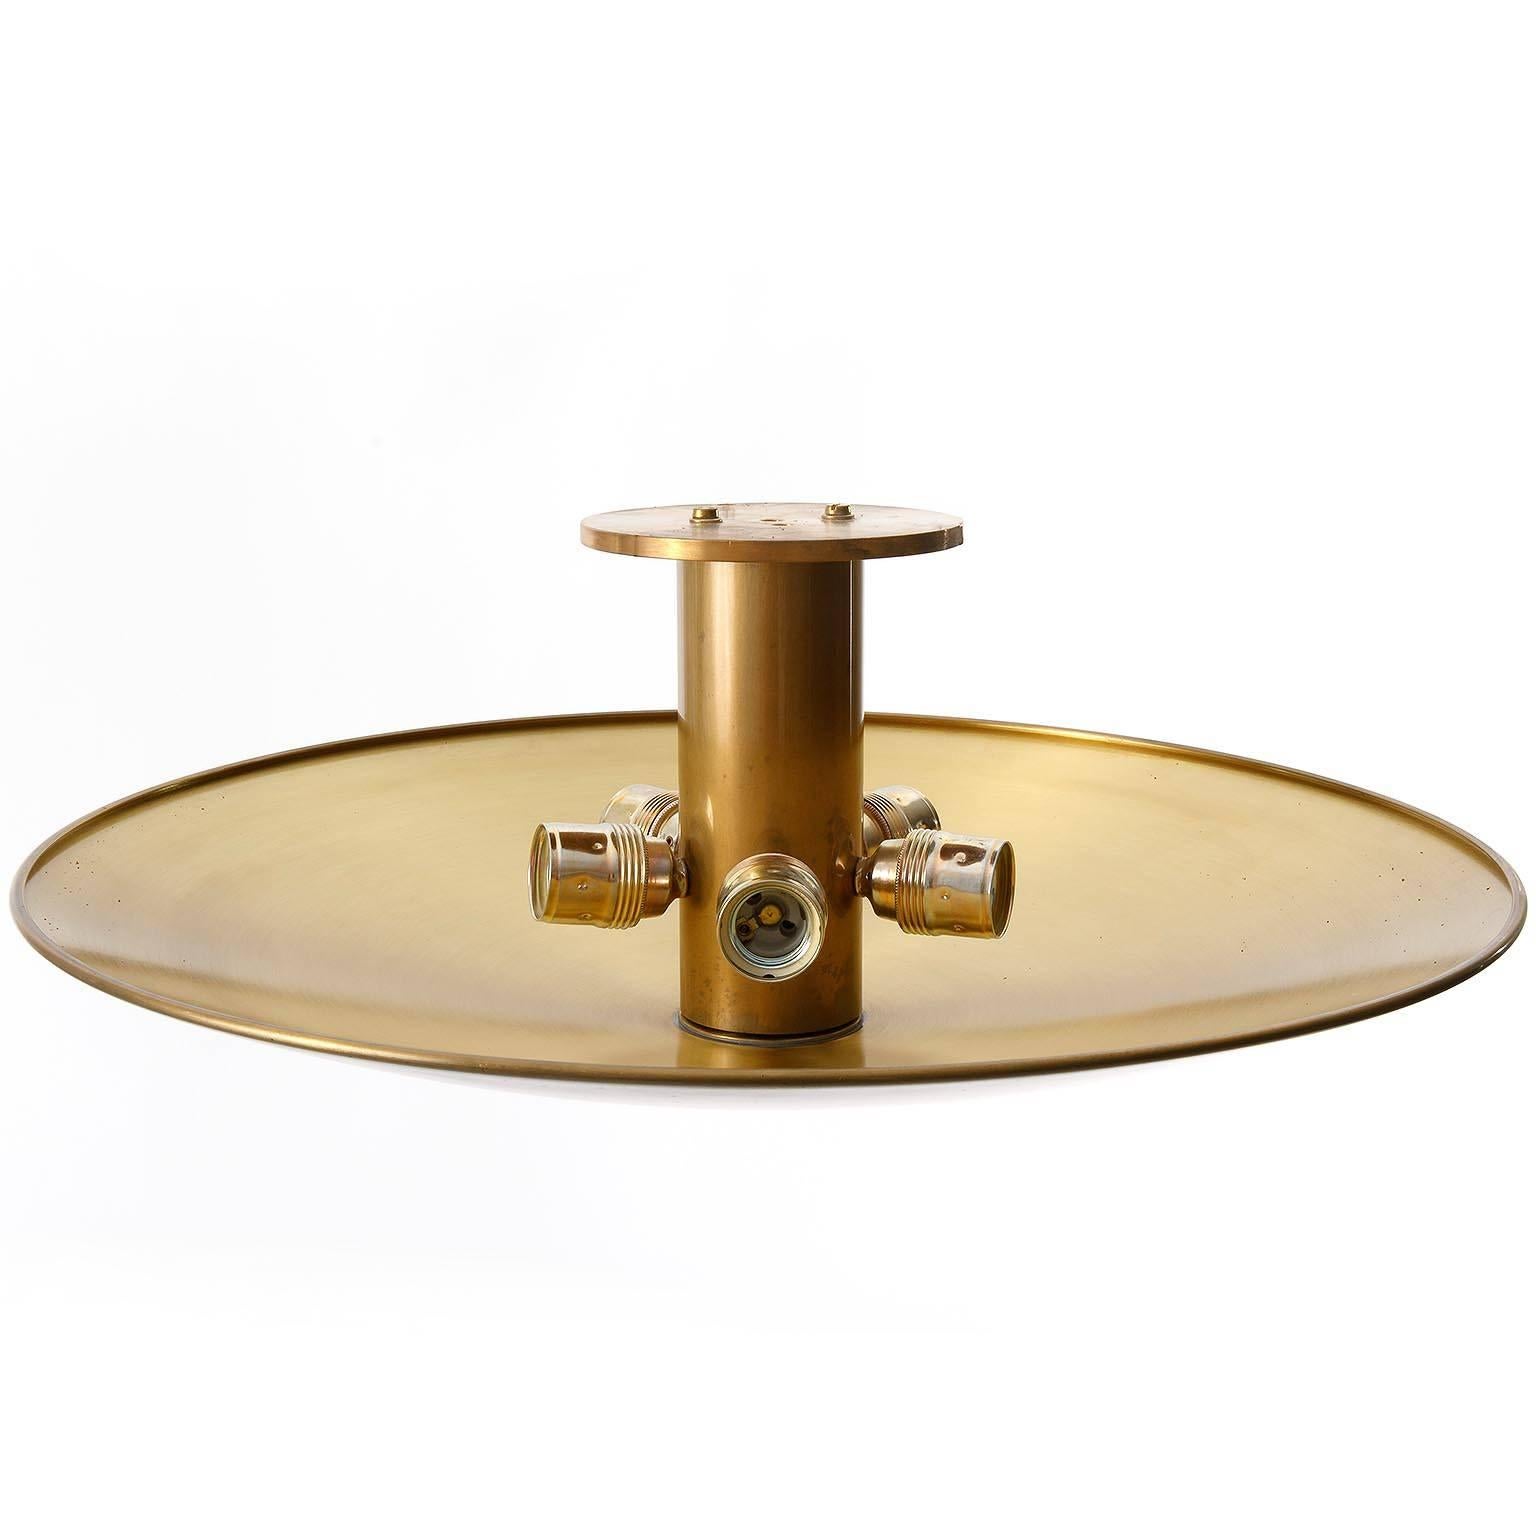 A large uplight bowl ceiling light fixture by Florian Schulz, Germany, manufactured in Mid-Century, circa 1970 (late 1960s-1970s). The lamp is made of patinated solid brass in a tarnished finish. It takes five medium Edison base bulbs.